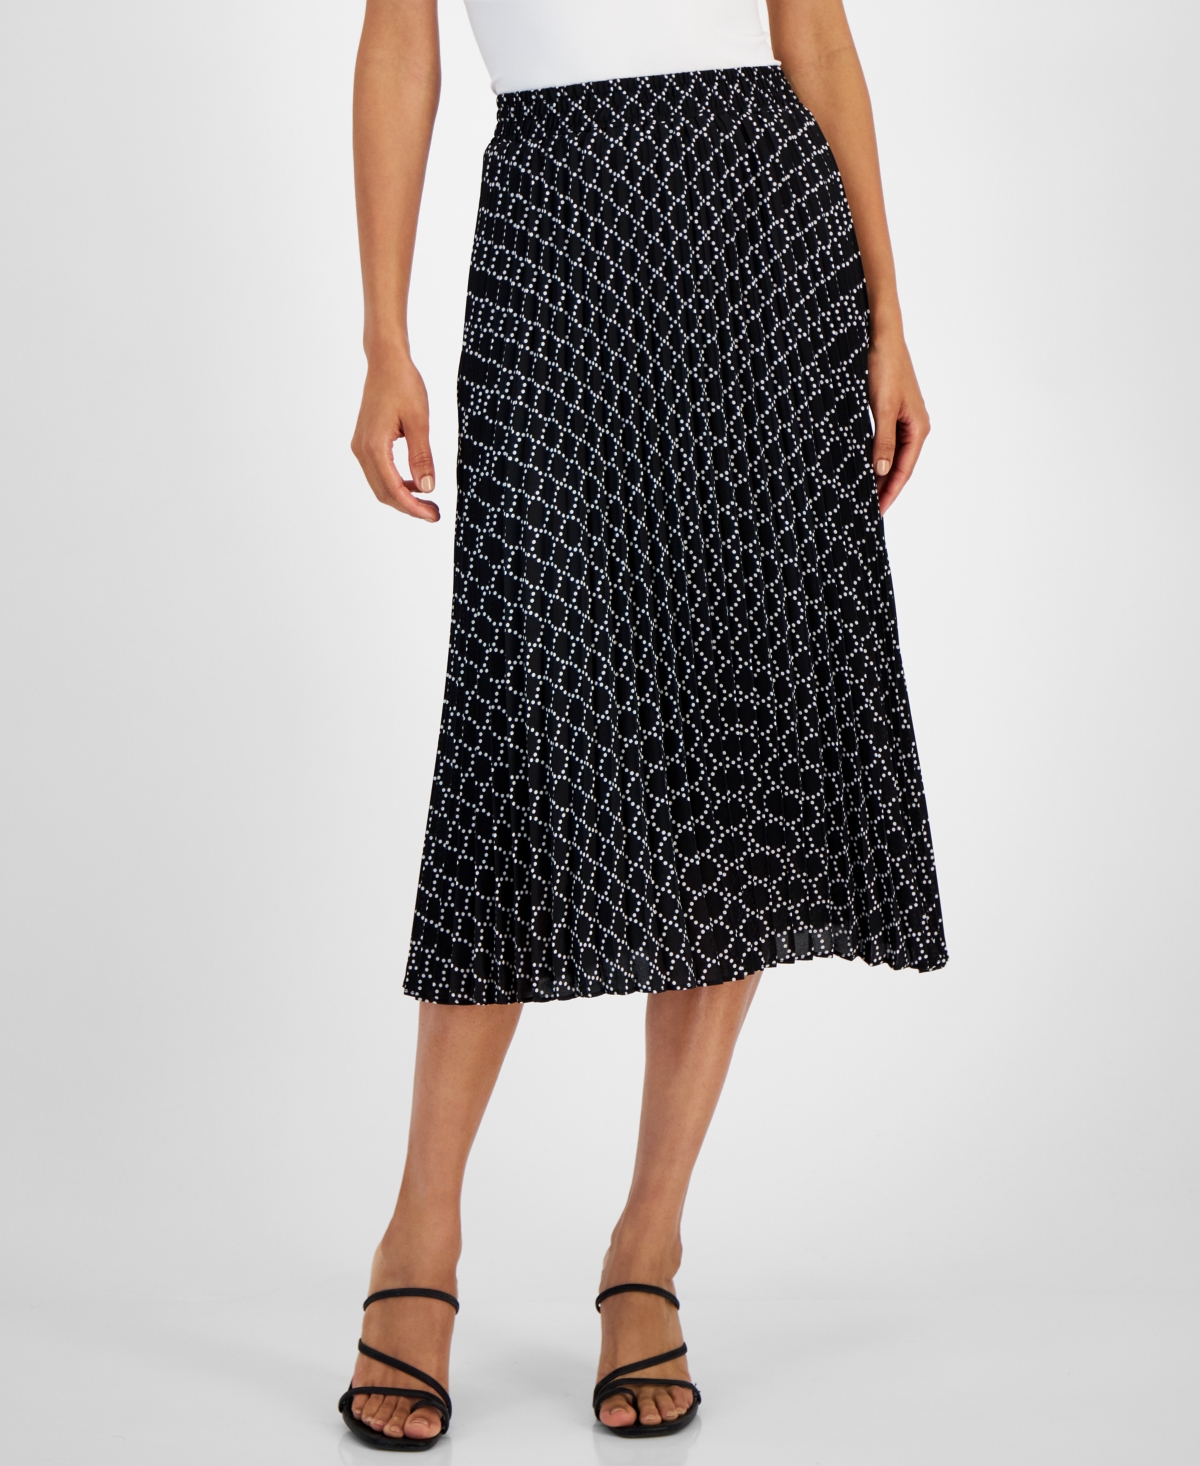 Women's Printed Pleated Pull-On Midi Skirt - Dotted Black